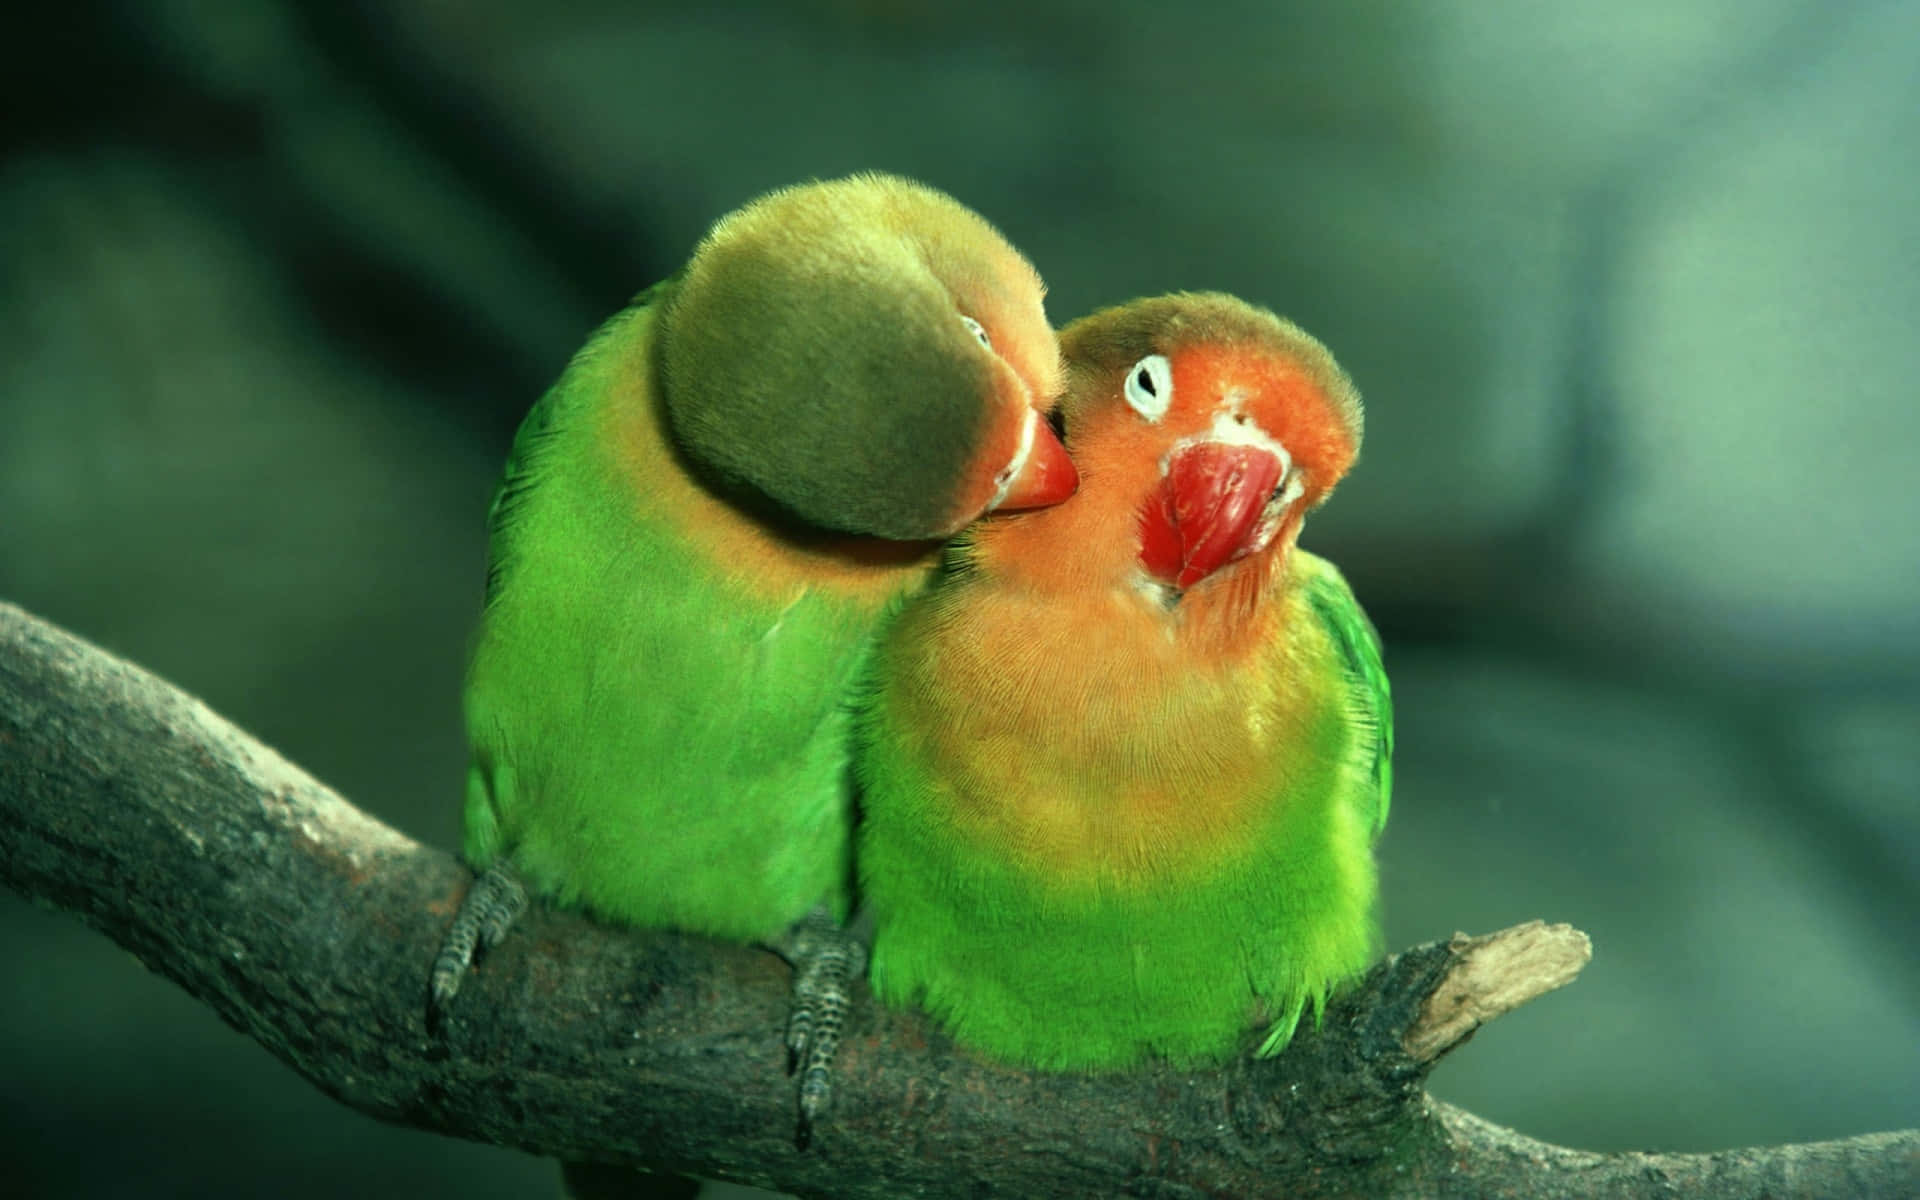 Two love birds embracing one another